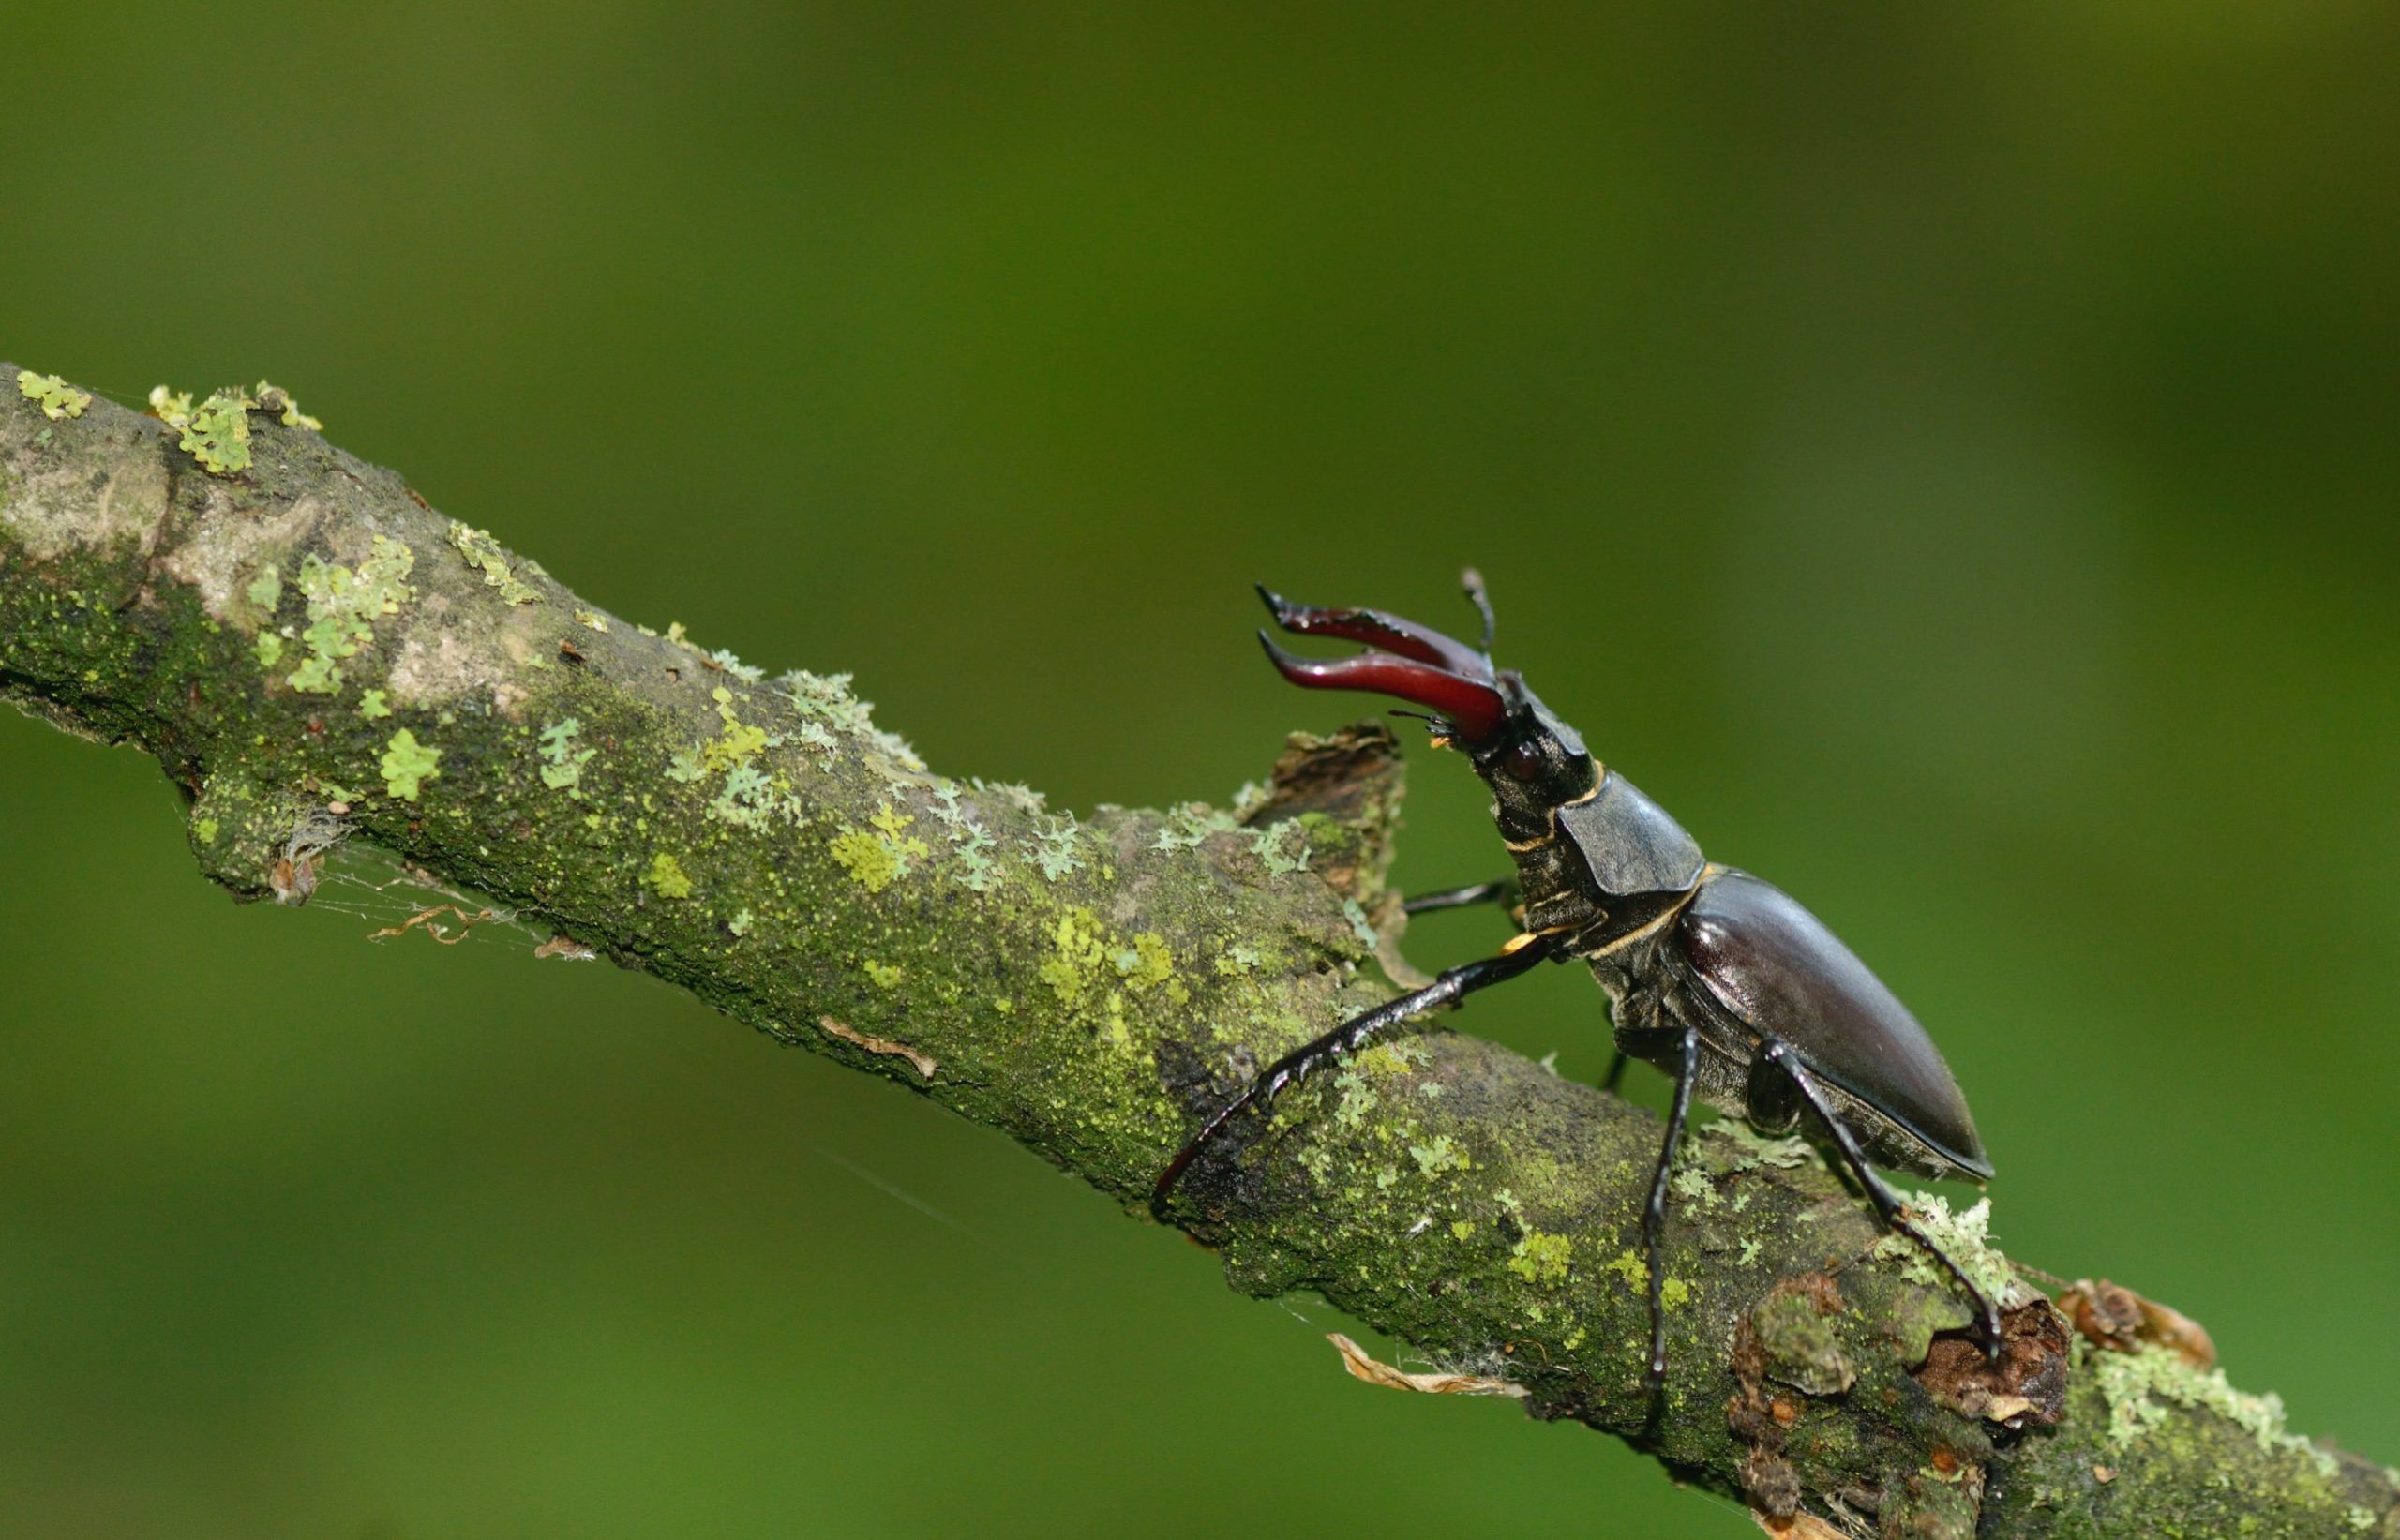 Ben Andrews - Male Stag beetle